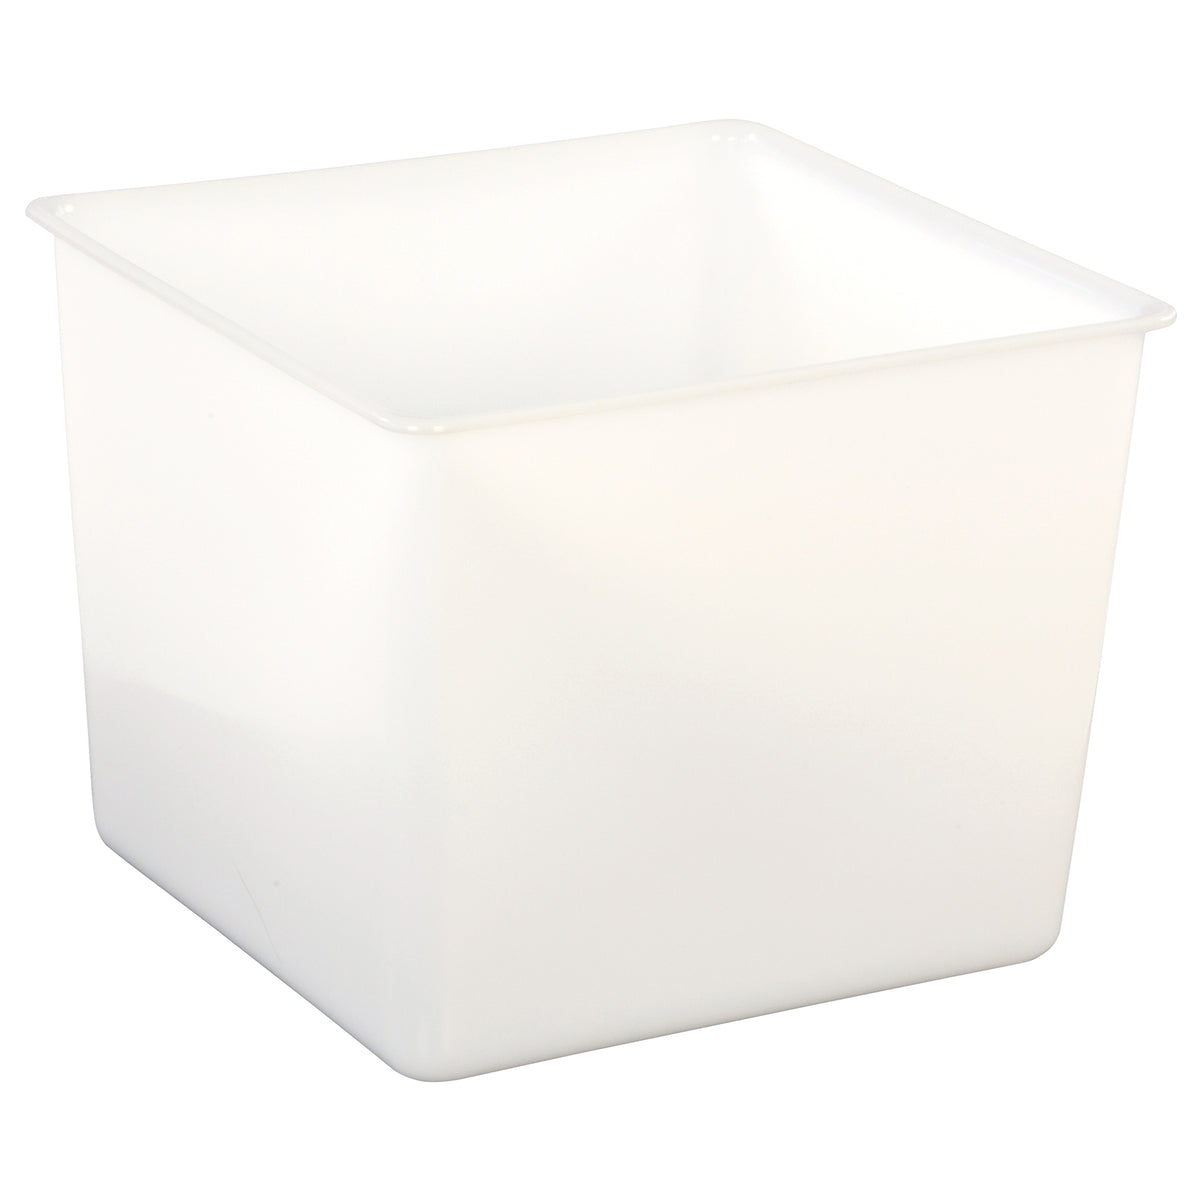 Opaque Organizational Small Bins For Child Learning Storage.